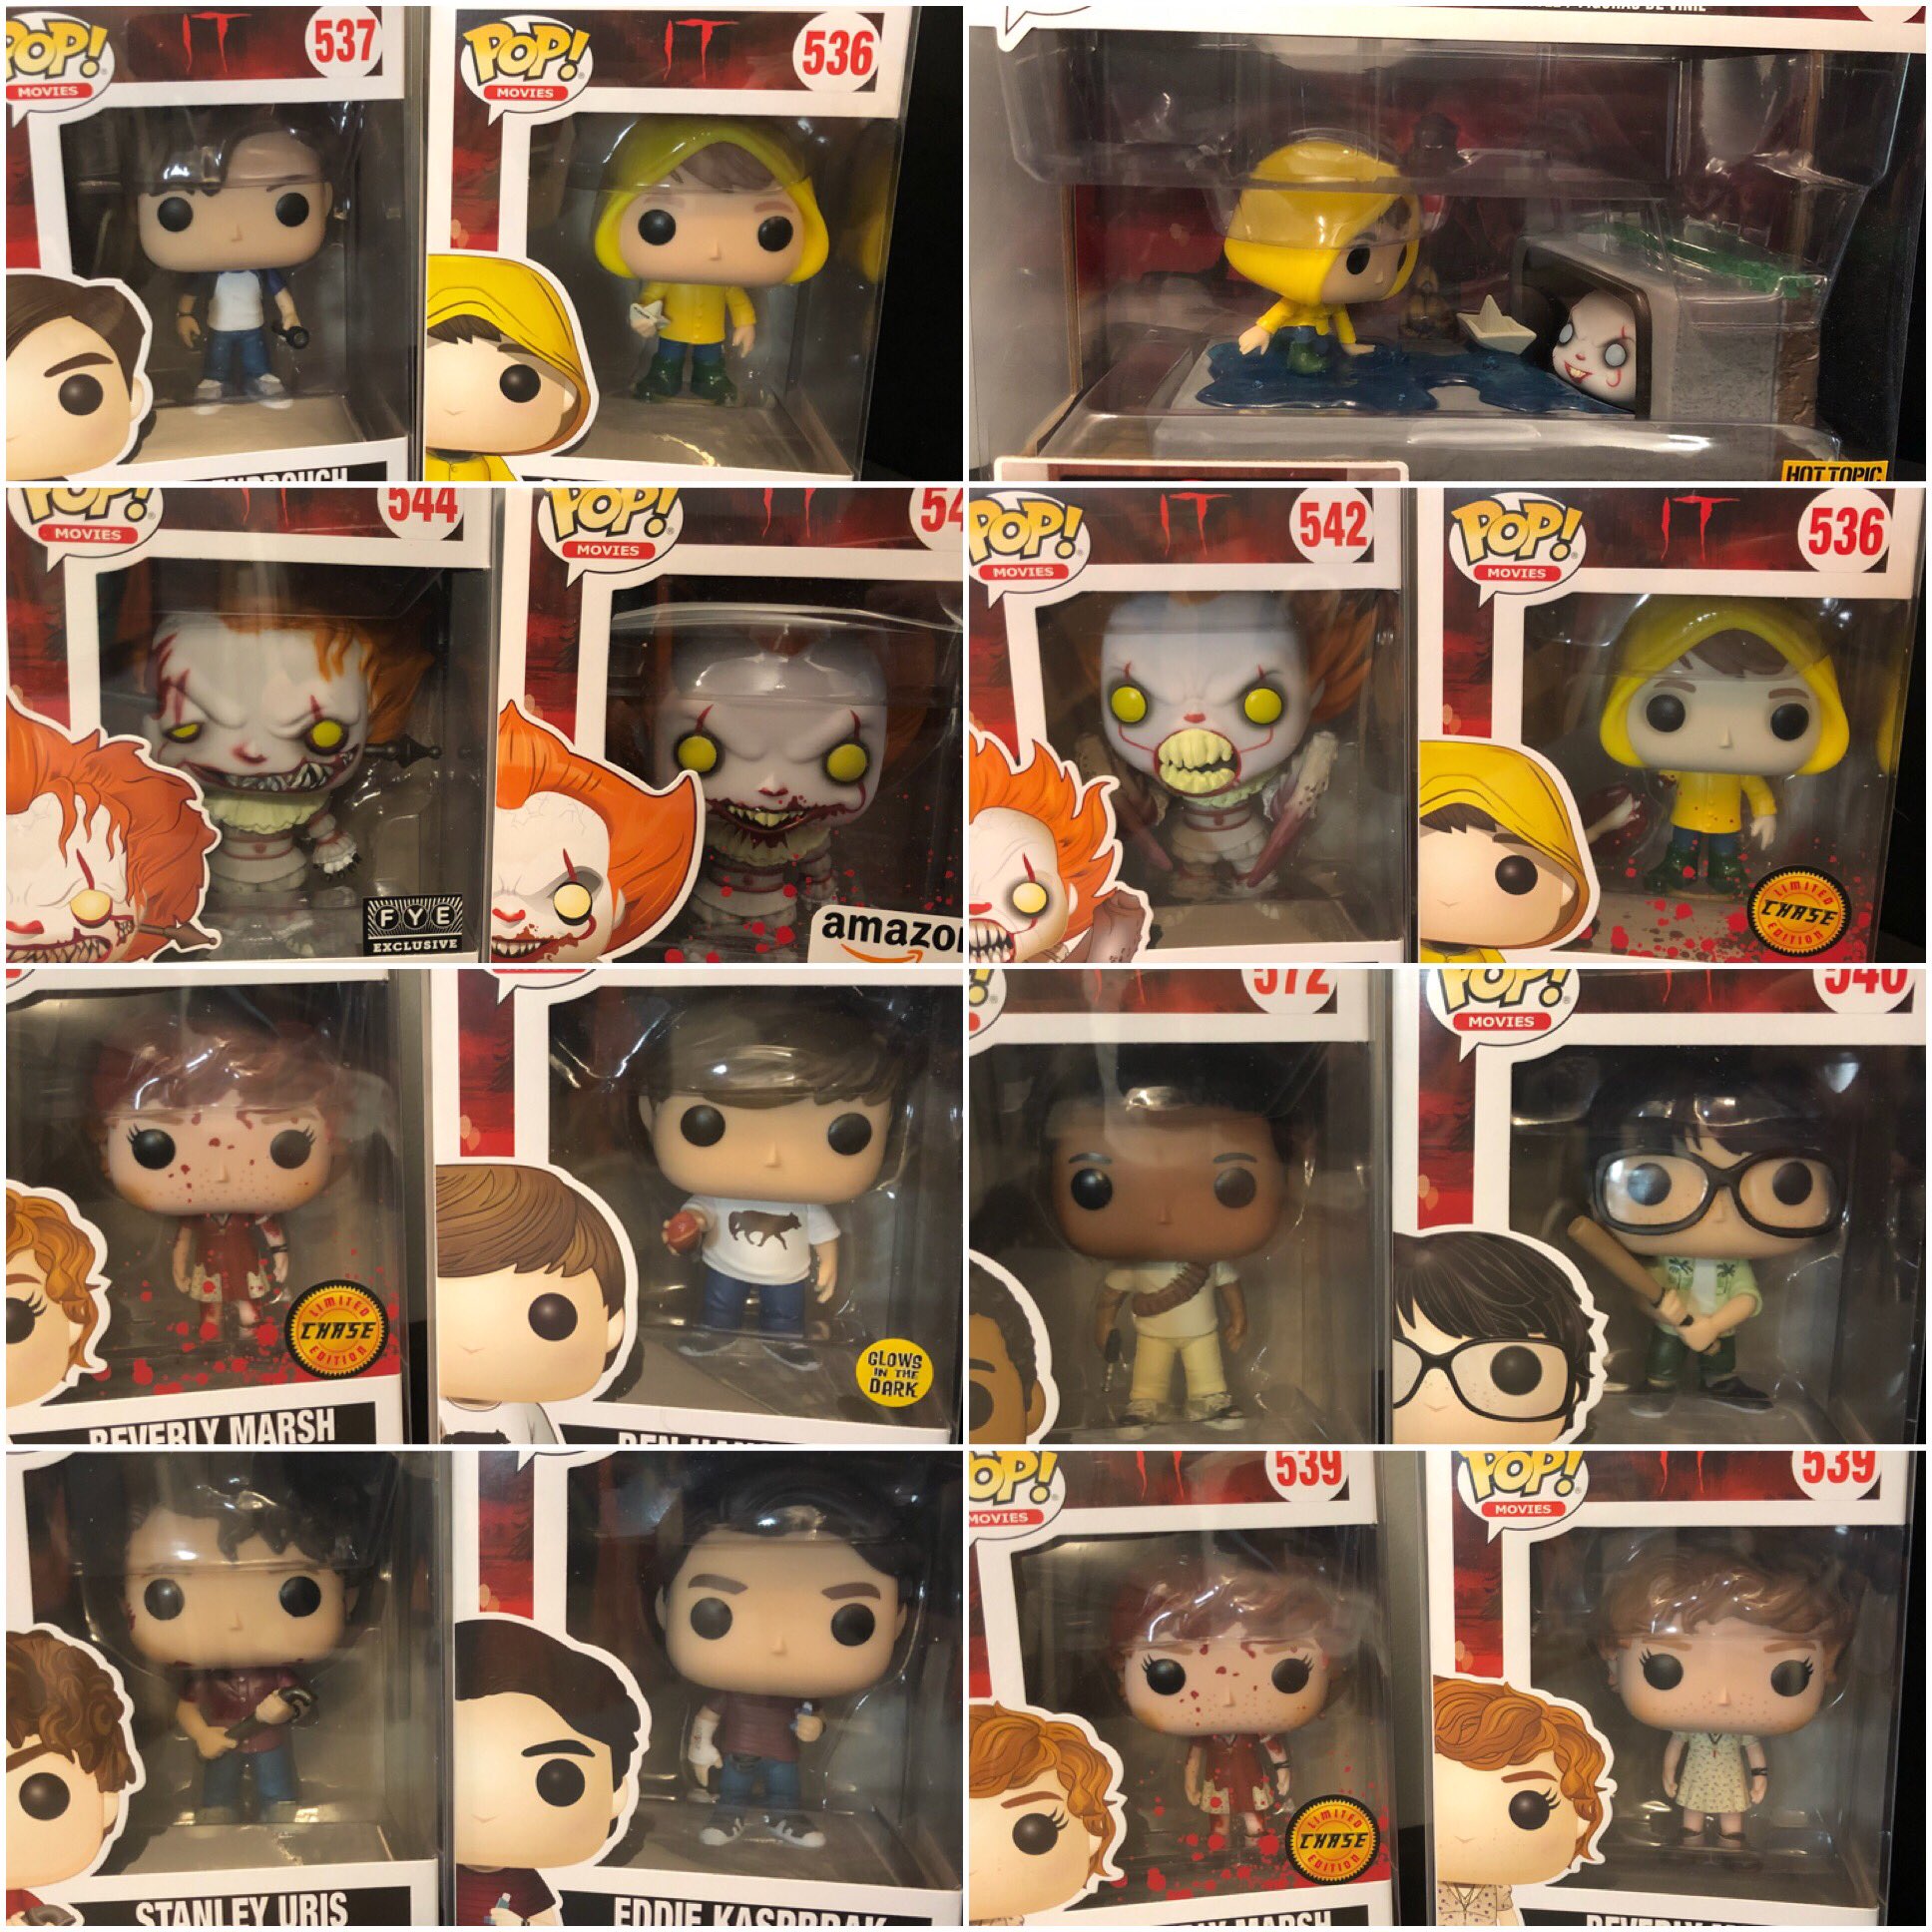 Luidspreker bal Spreek uit The Geek Nerd Fanboy on Twitter: "Complete set of Funko IT Movie series 2  Pops! including the Amazon and FYE Pennywise exclusives and the Hot Topic  Georgie/Pennywise Gutter Movie Moment. #funko #funkopop #